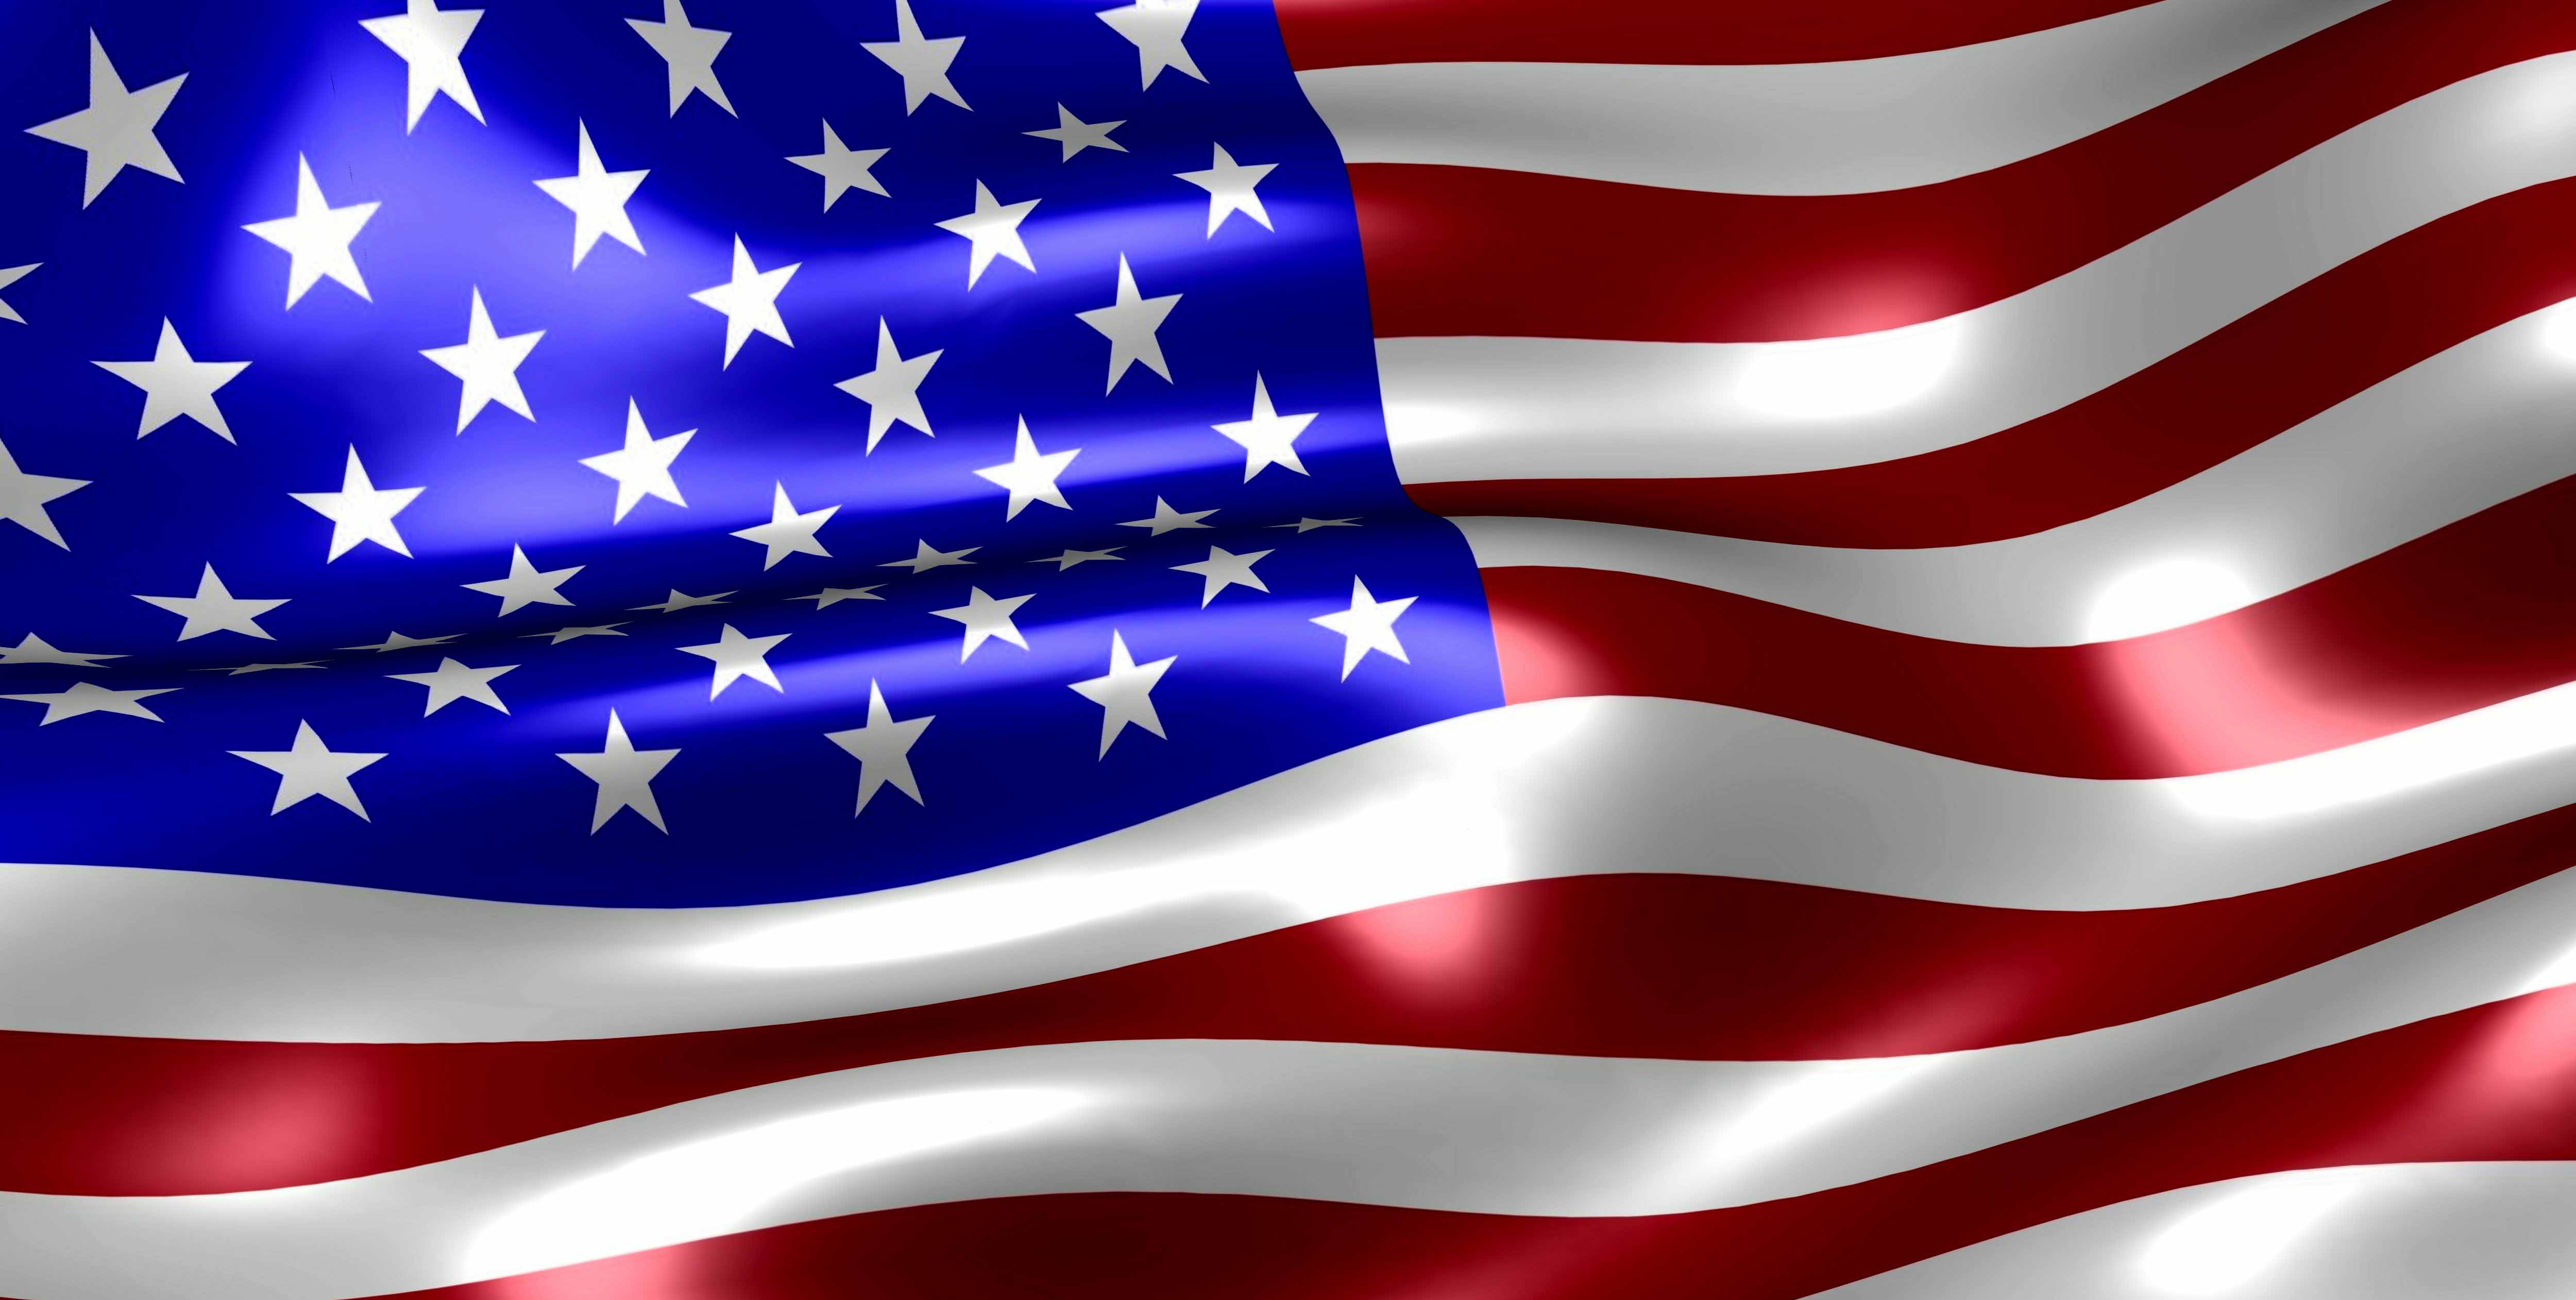 USA Flag Hd Wallpapers Free Download